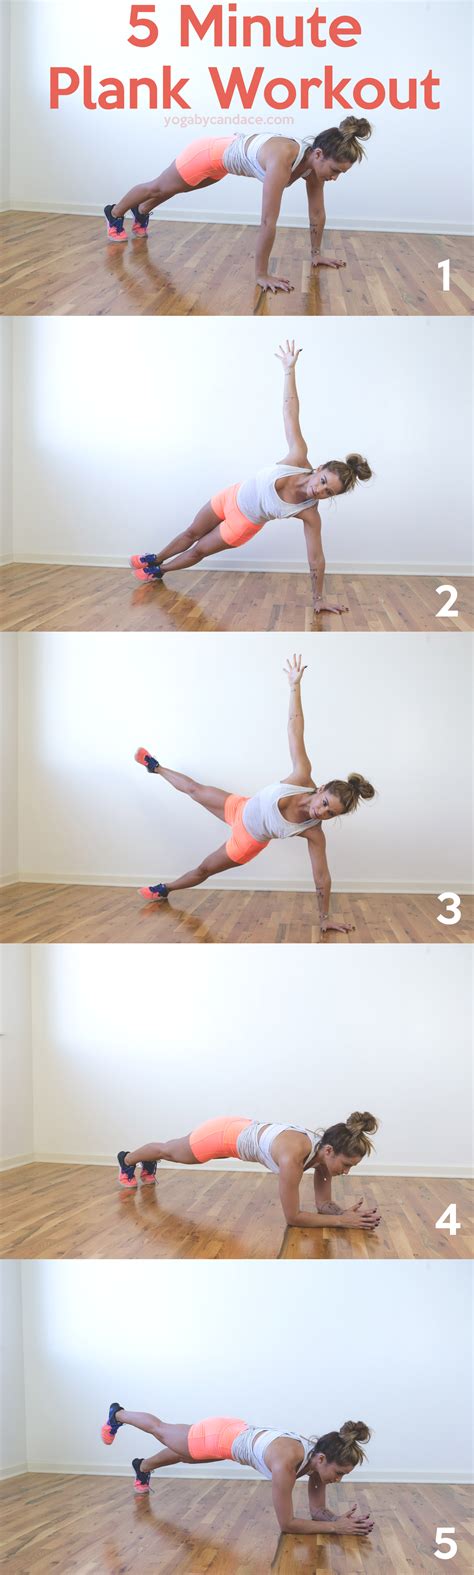 5 Minute Plank Workout For Core Strength — Yogabycandace